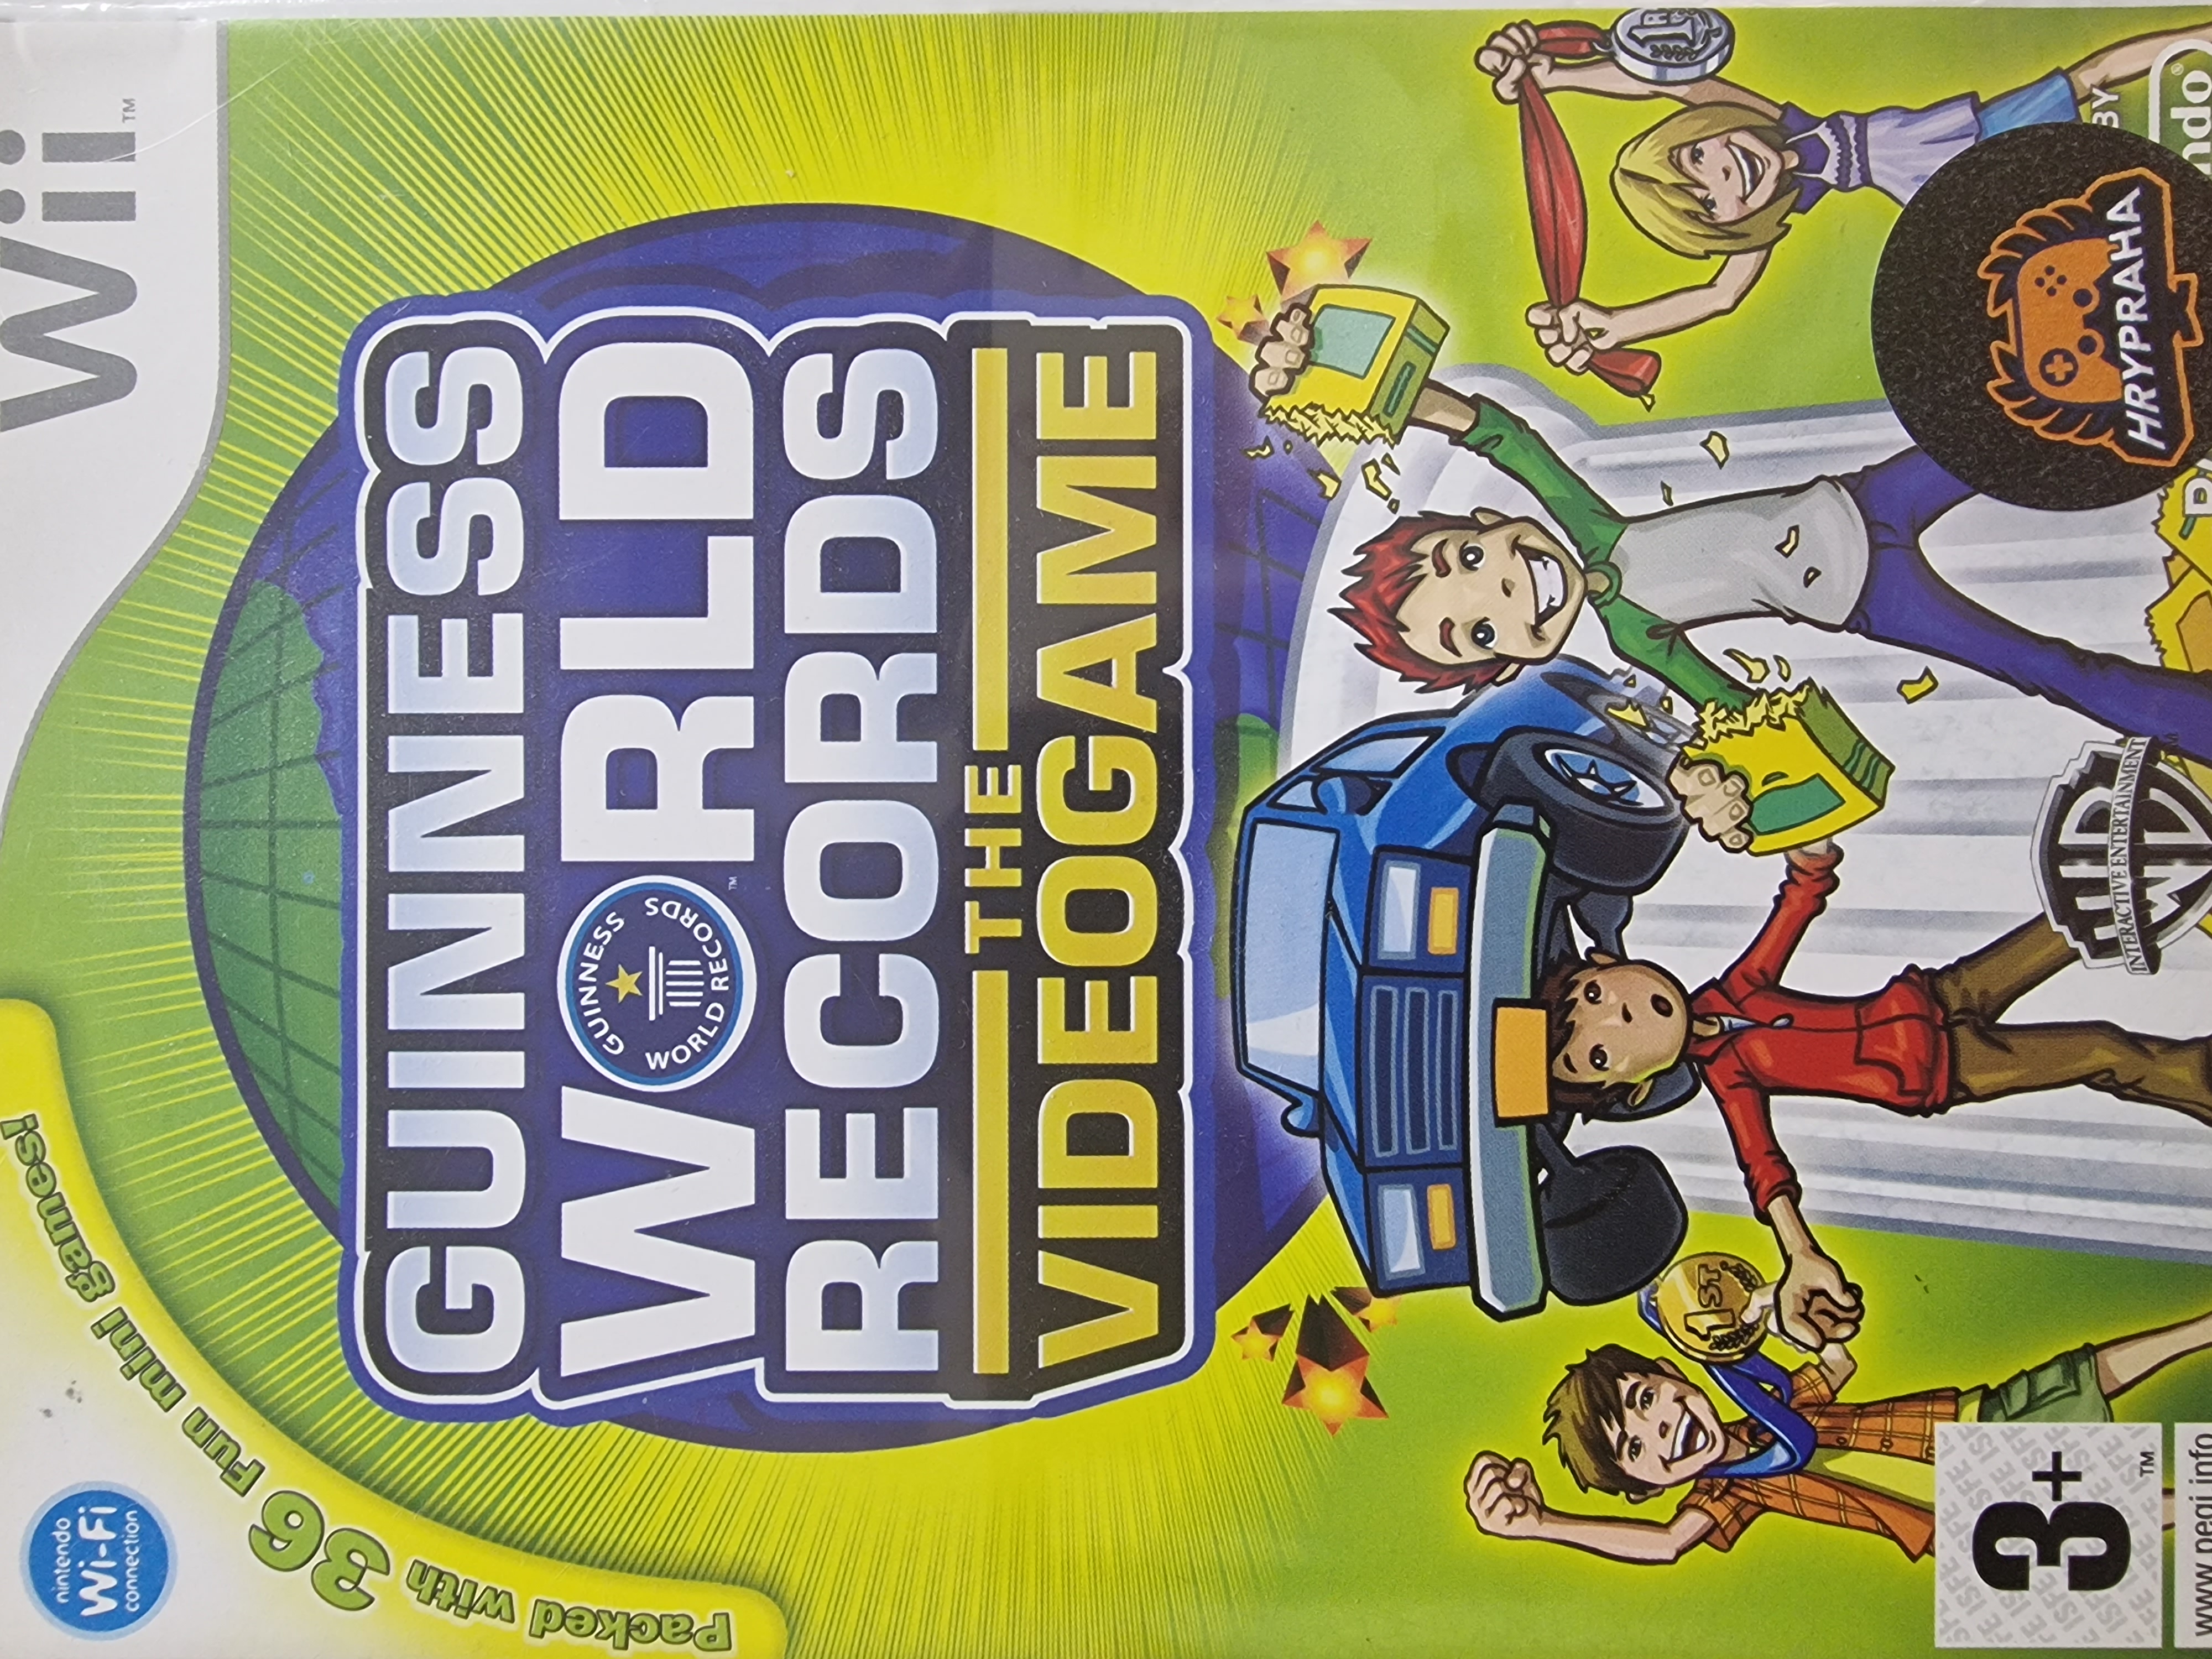 Guinness World Records The Videogame  - Nintendo wii 